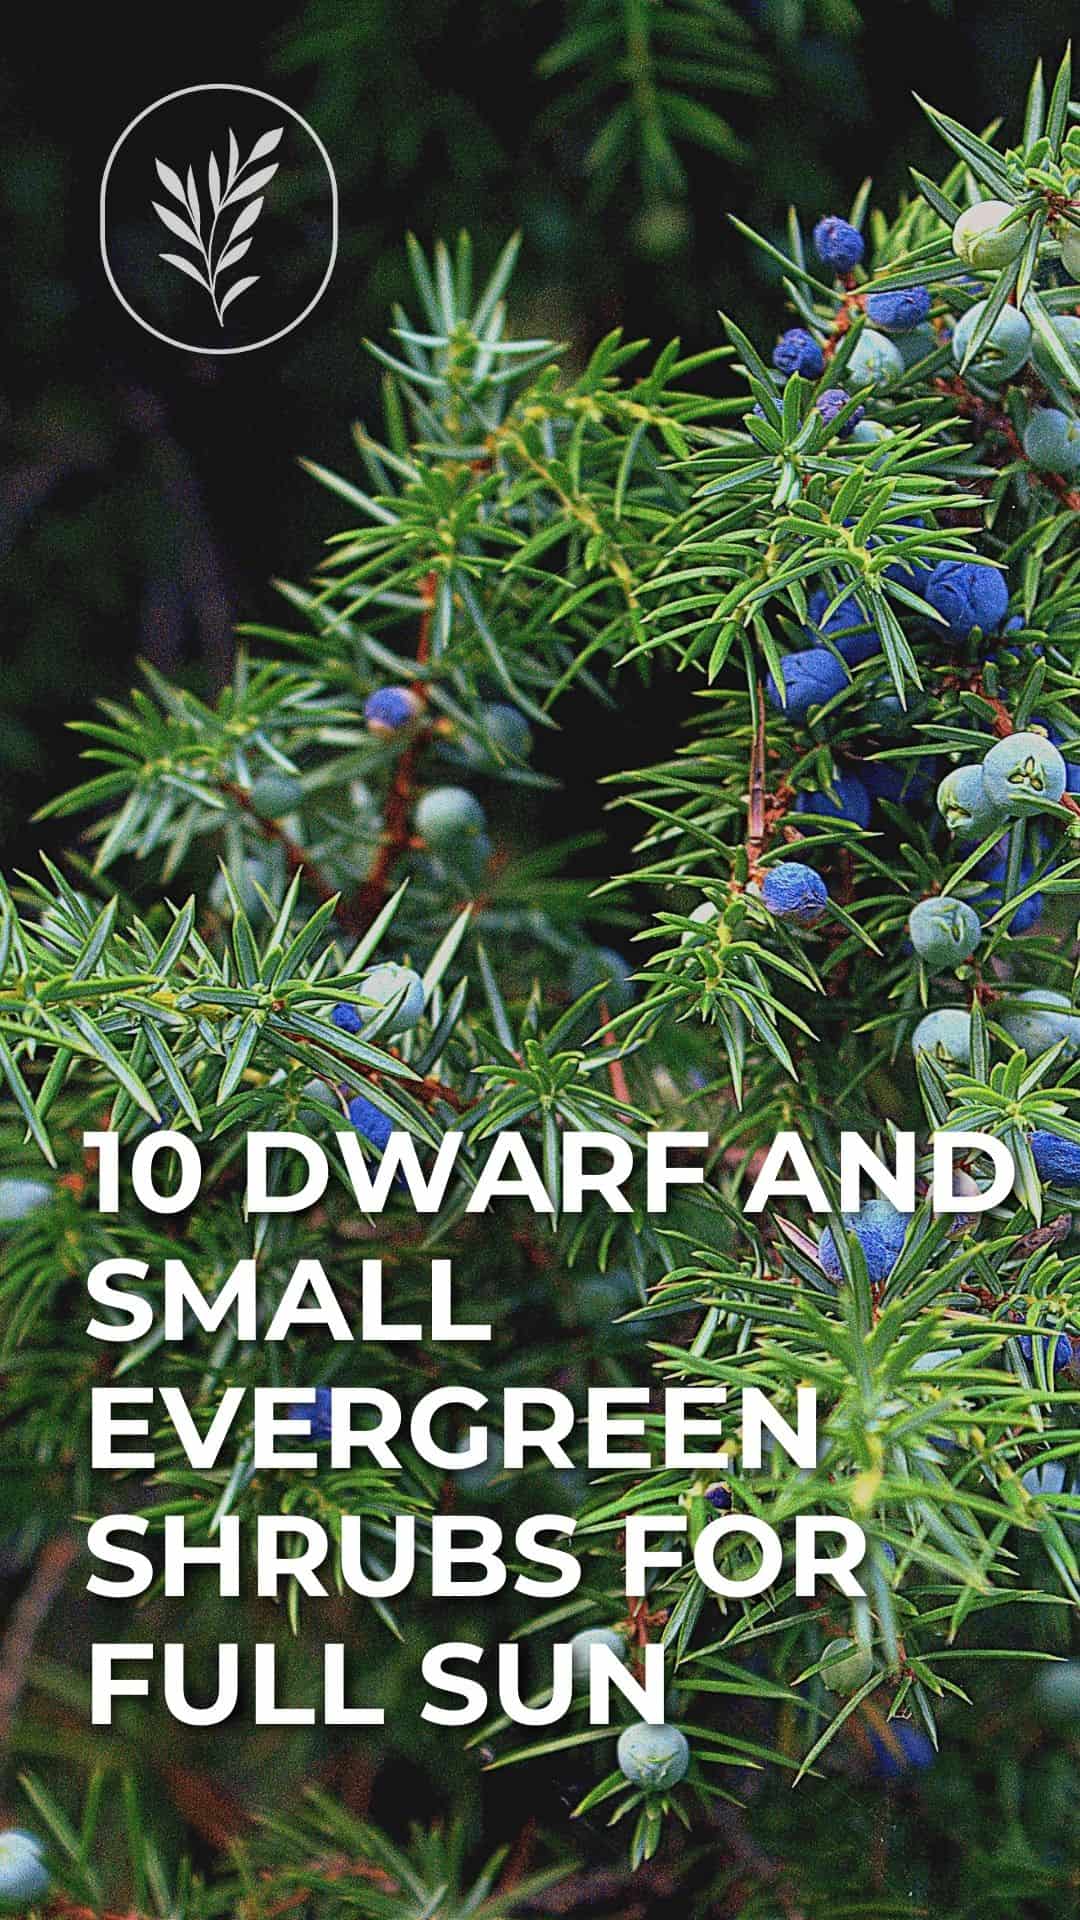 10 dwarf and small evergreen shrubs for full sun - story via @home4theharvest